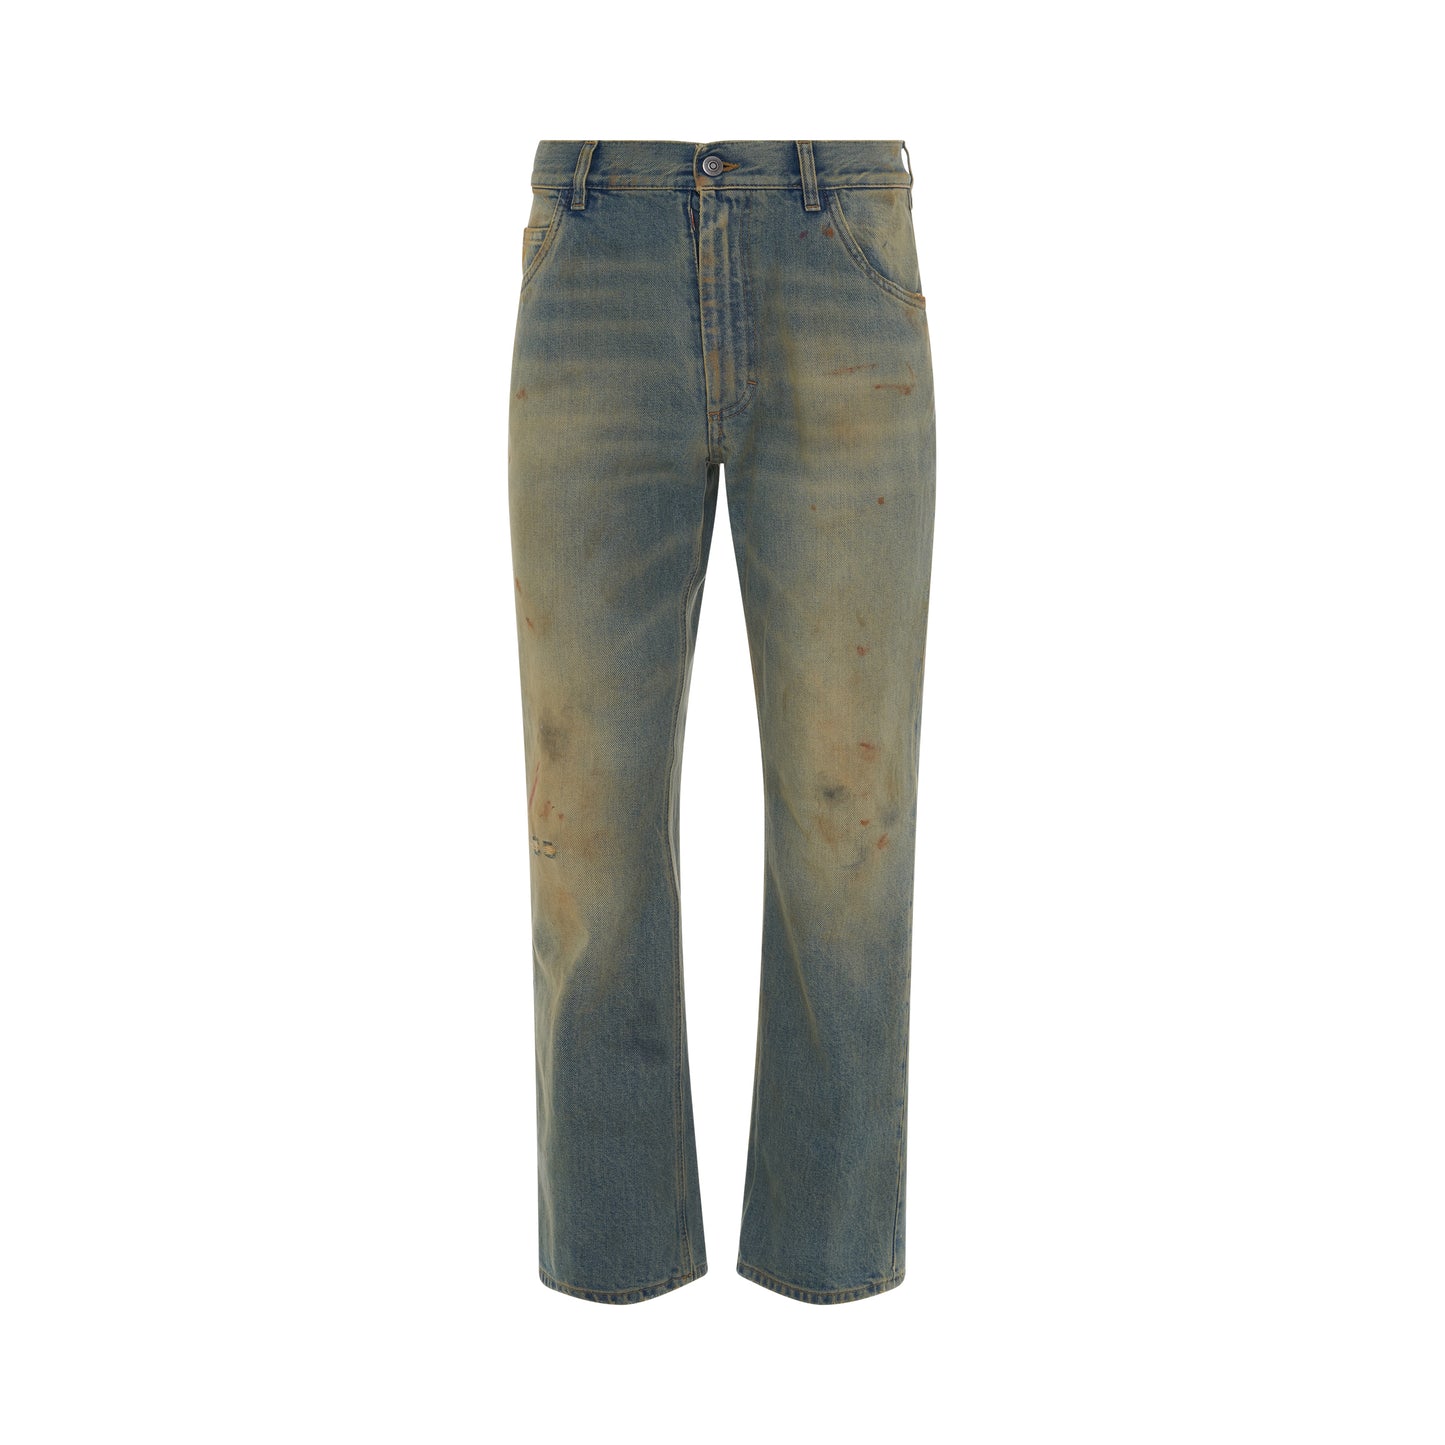 5 Pockets Straight Leg Jeans in Dirty Wash